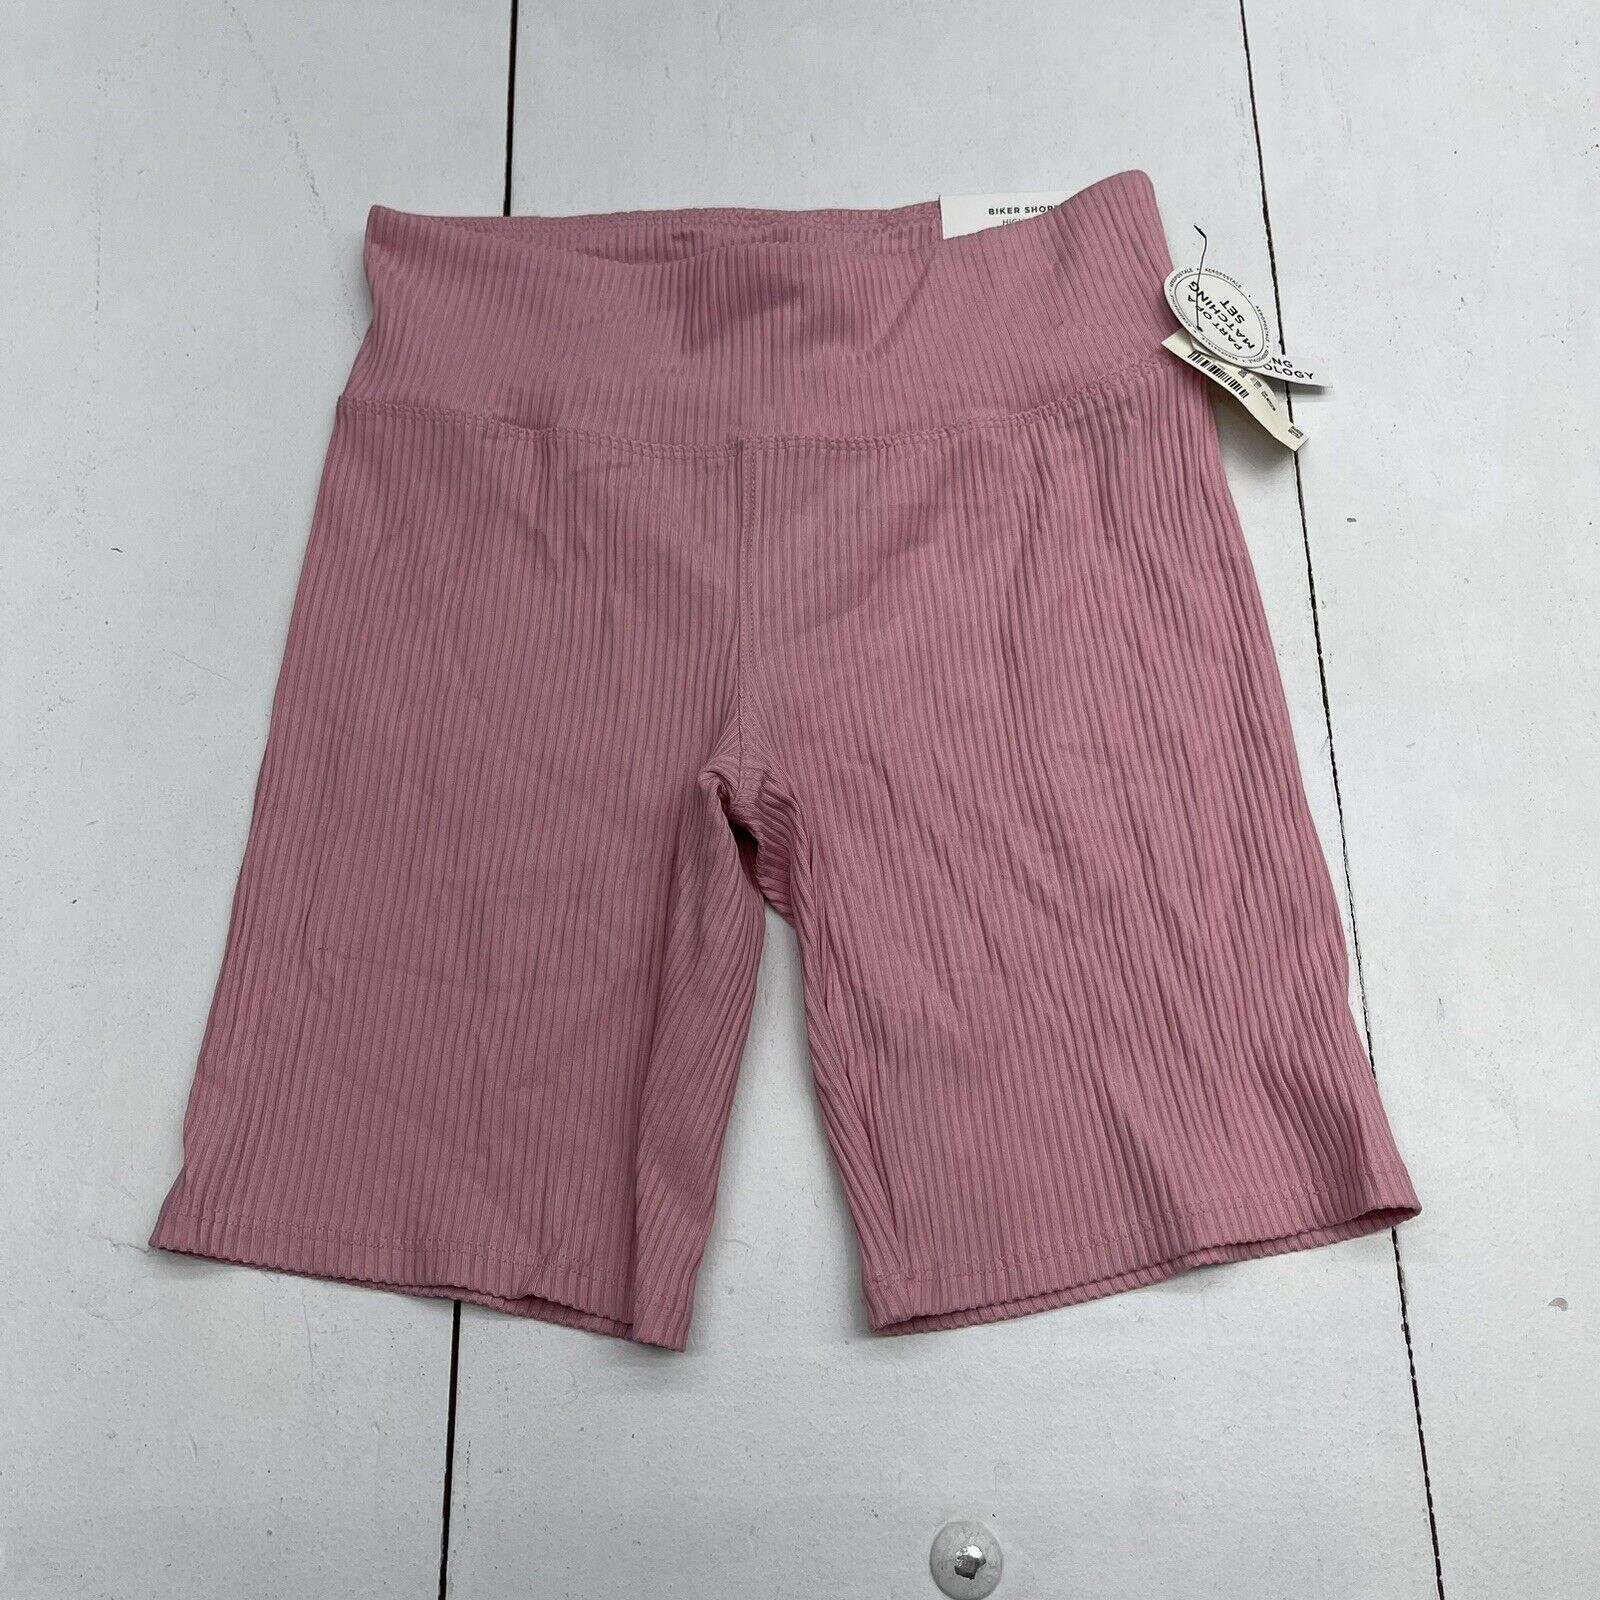 Aeropostale Pink Ribbed High Rise Biker Shorts Women’s Size Small New